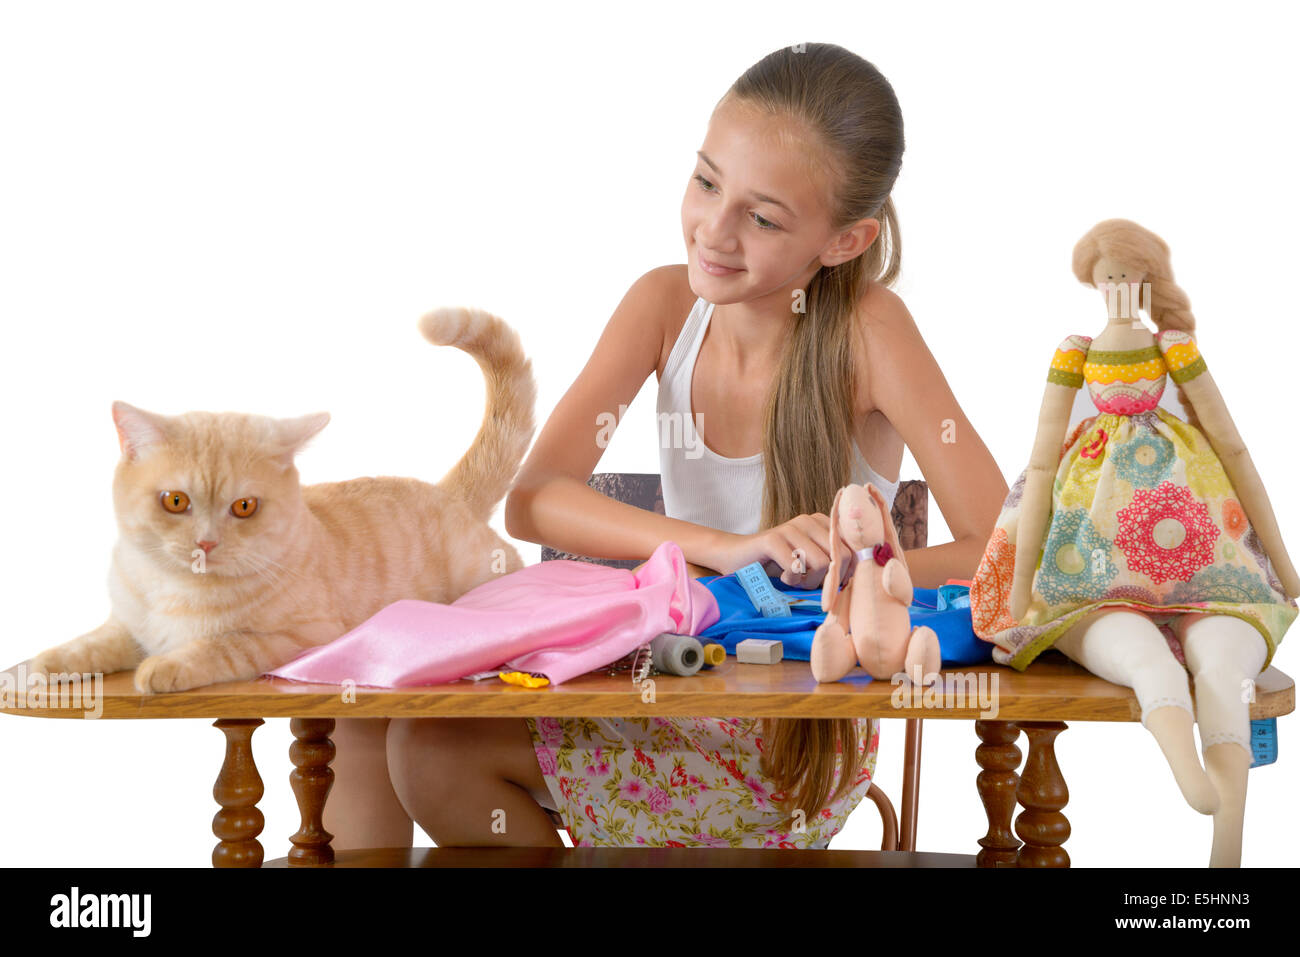 The red cat prevents the girl to sew toys from fabric Stock Photo